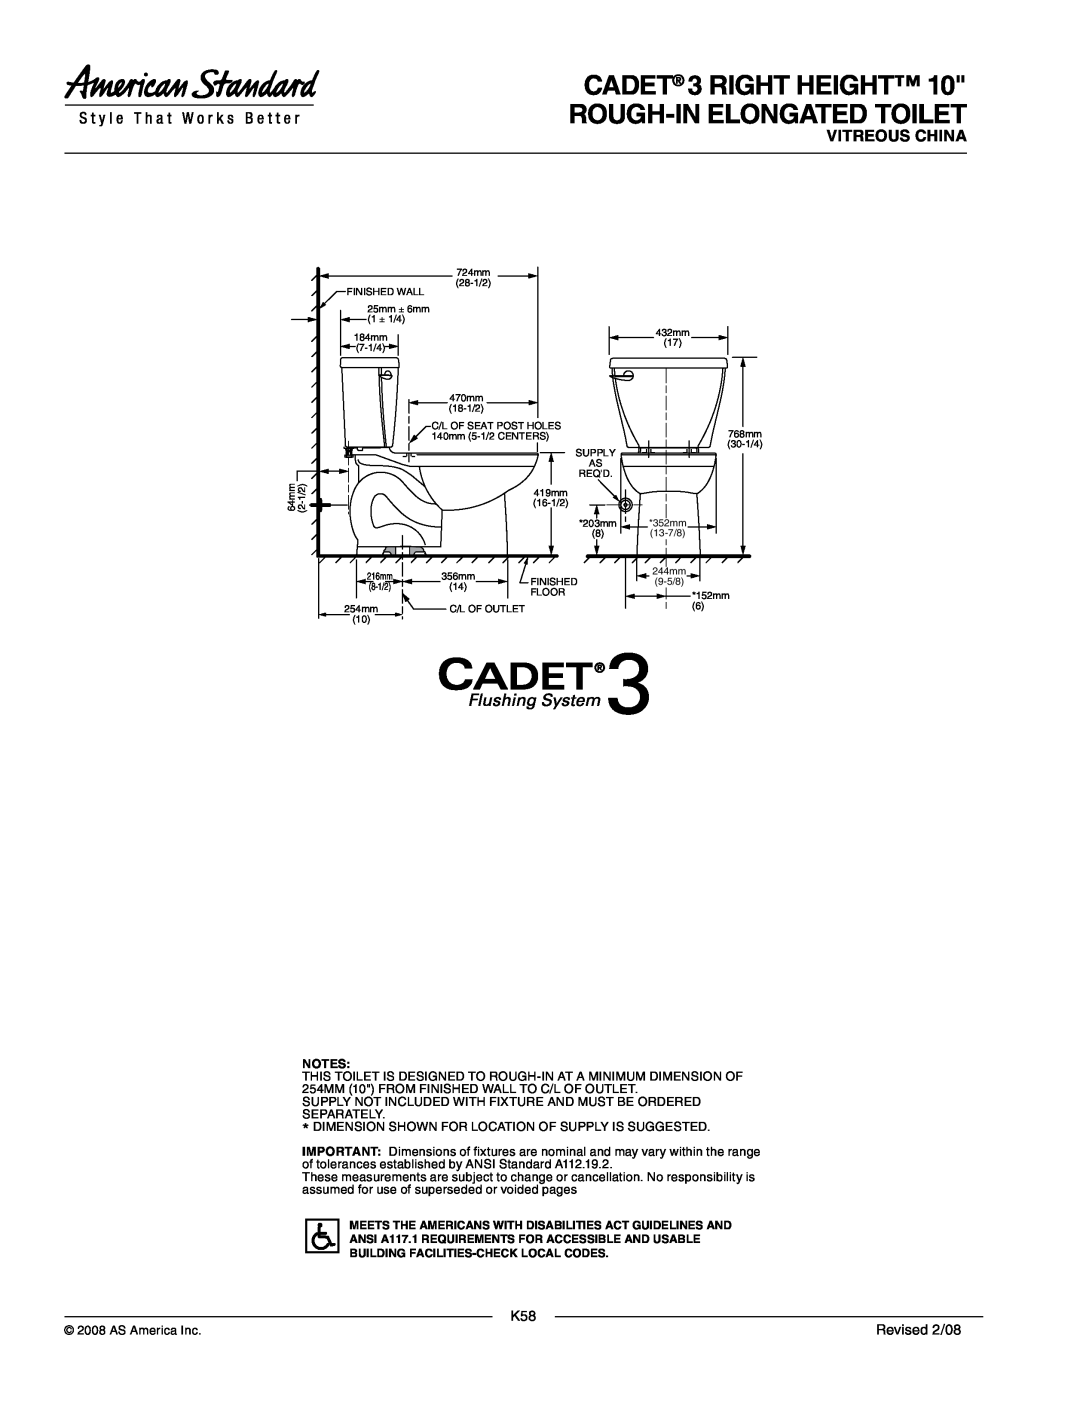 American Standard 2386.010 dimensions CADET 3 RIGHT HEIGHT 10 Rough-inELONGATED TOILET, Vitreous China, Revised 2/08 